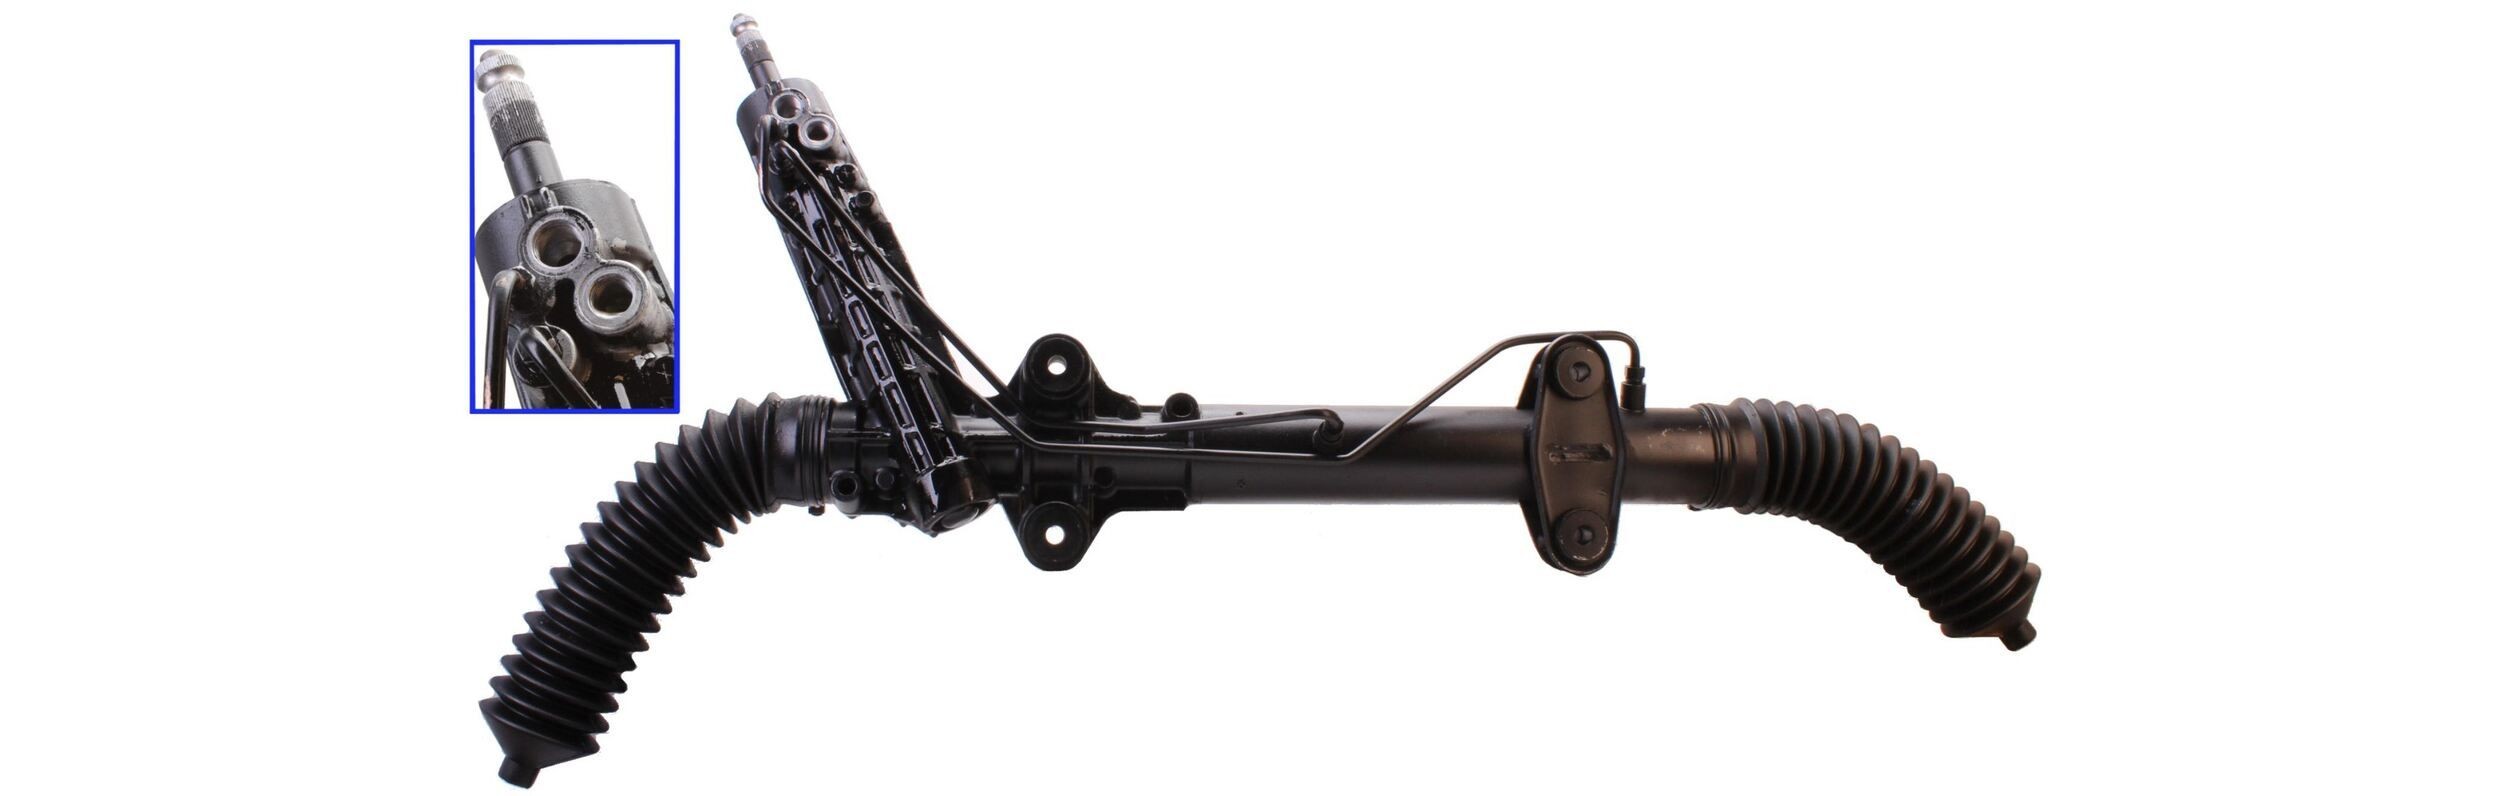 Mercedes A-Class Rack and pinion 7813165 DRI 712520226 online buy